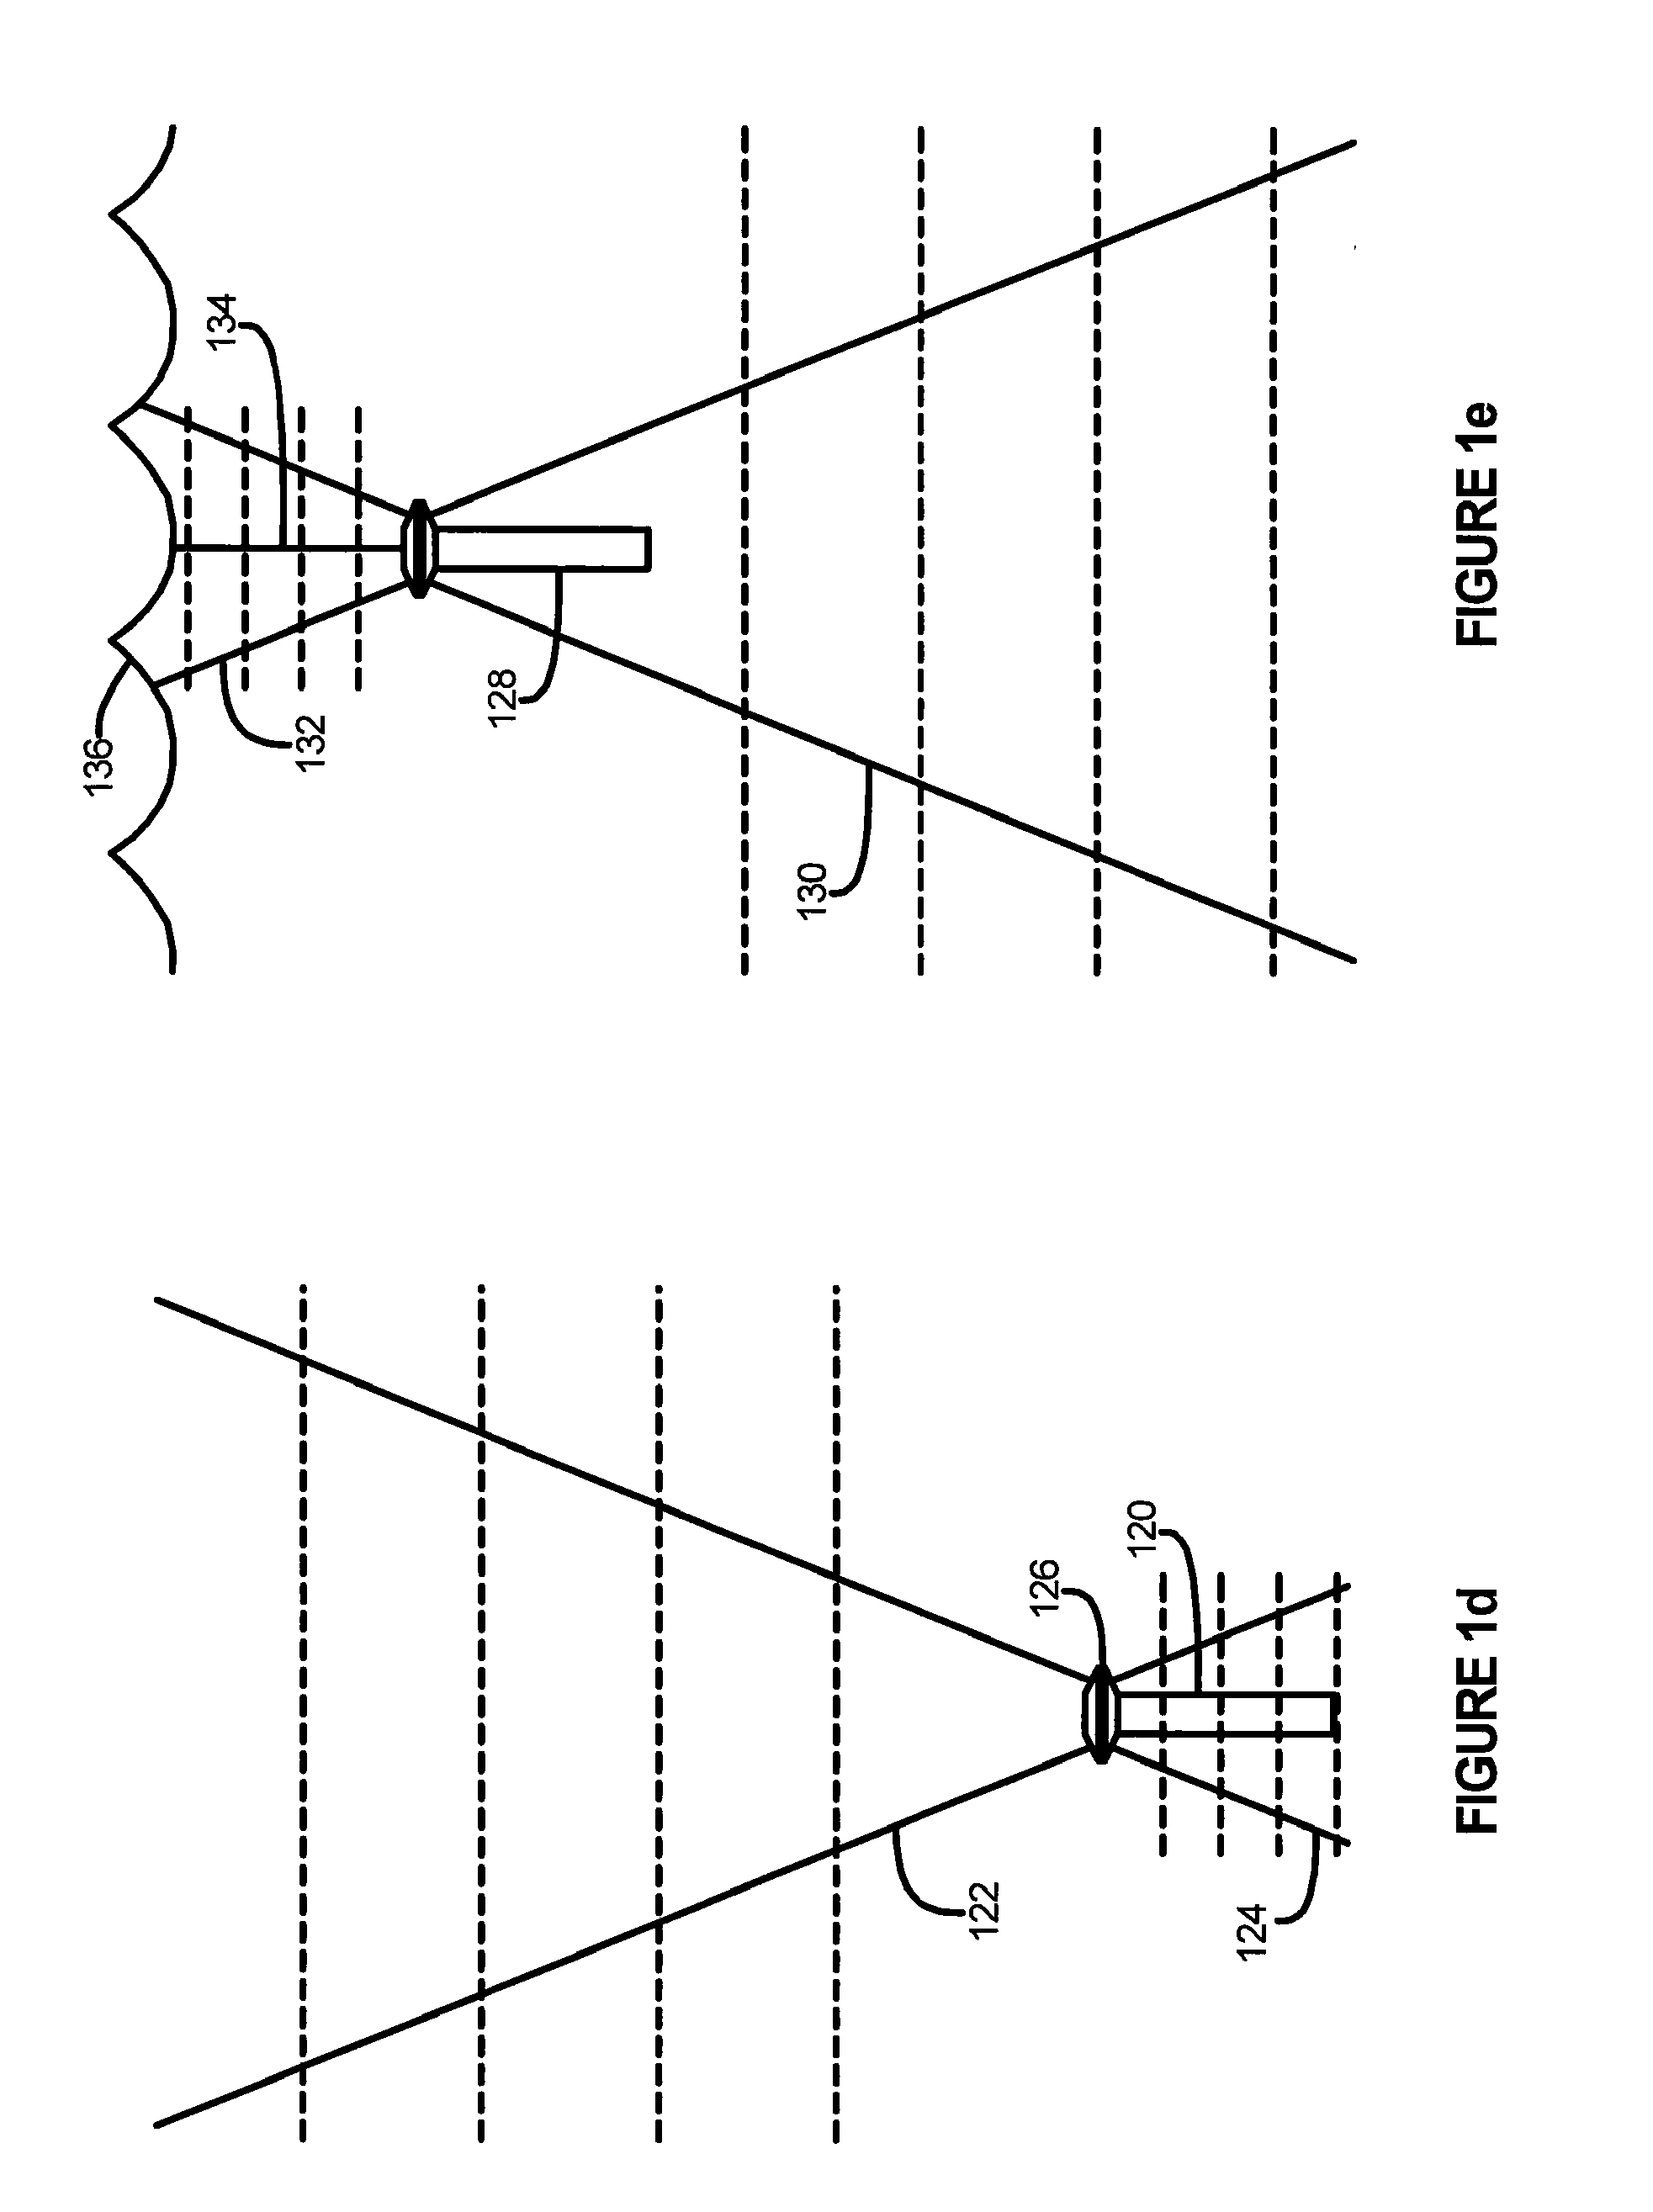 Acoustic Doppler Dual Current Profiler System and Method